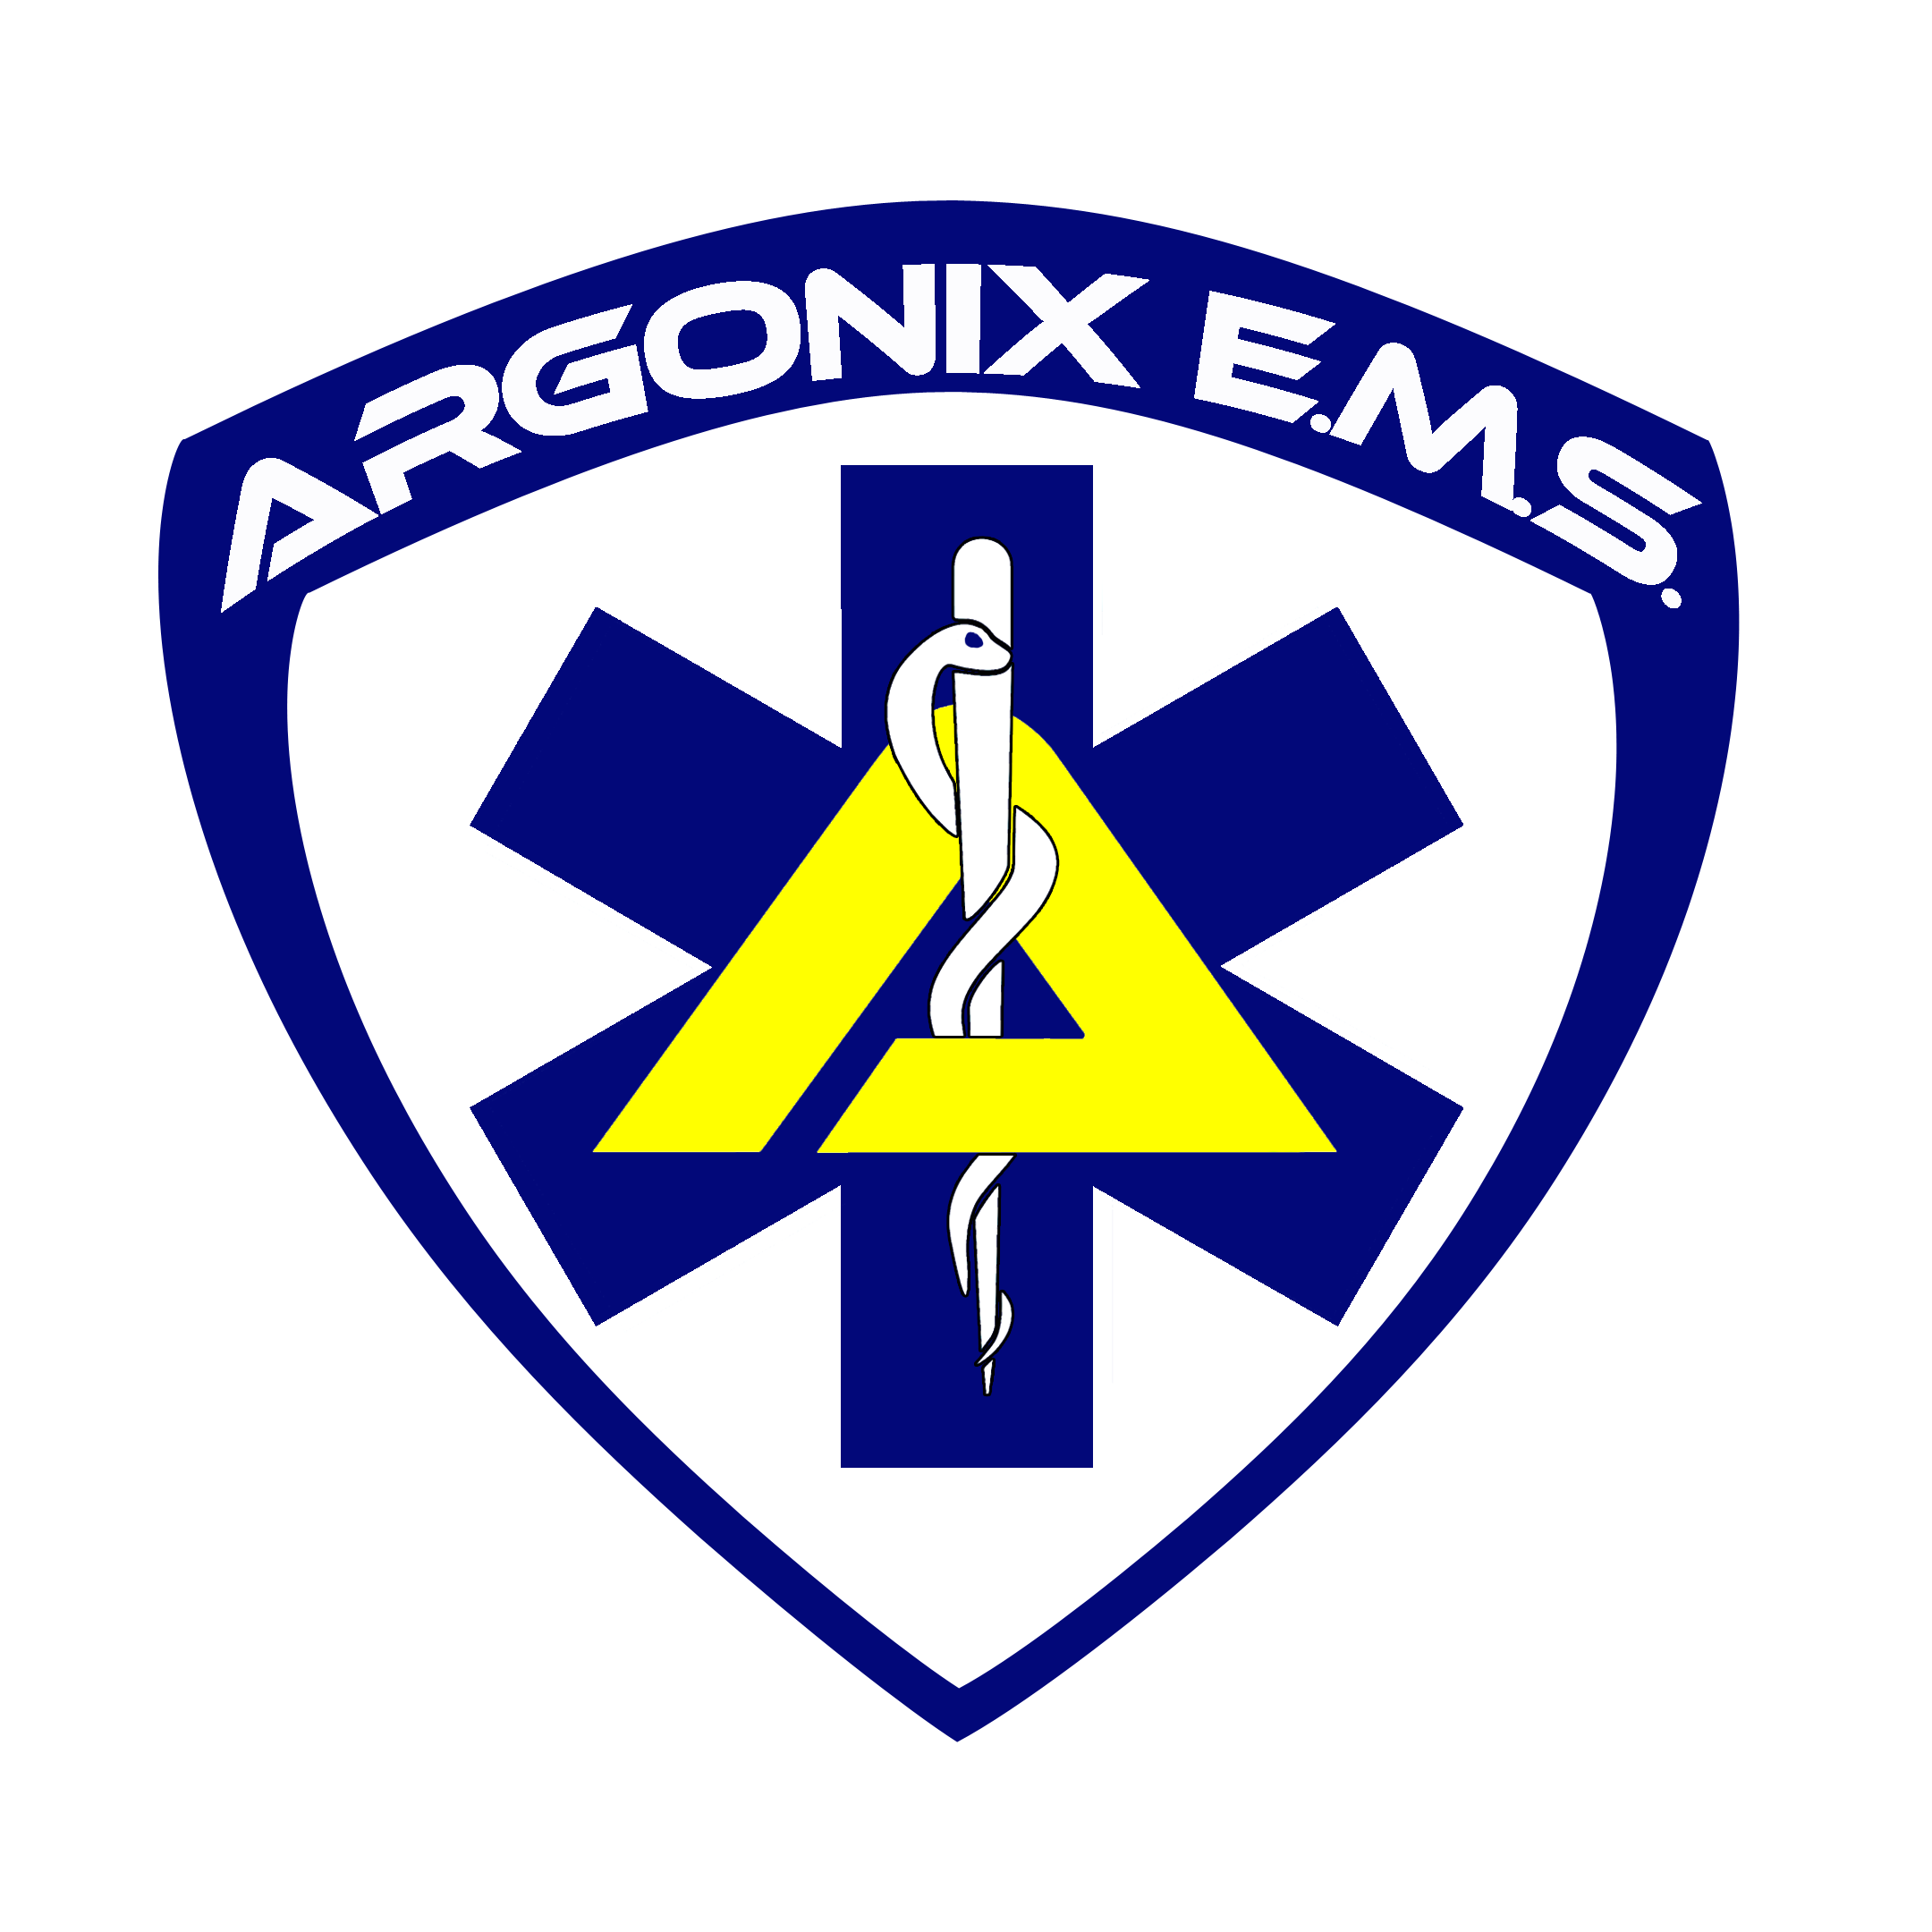 We are a medical company offering ambulance, emergency medical, training and consultancy services. 
You may contact us at 373-RESQ (7377)